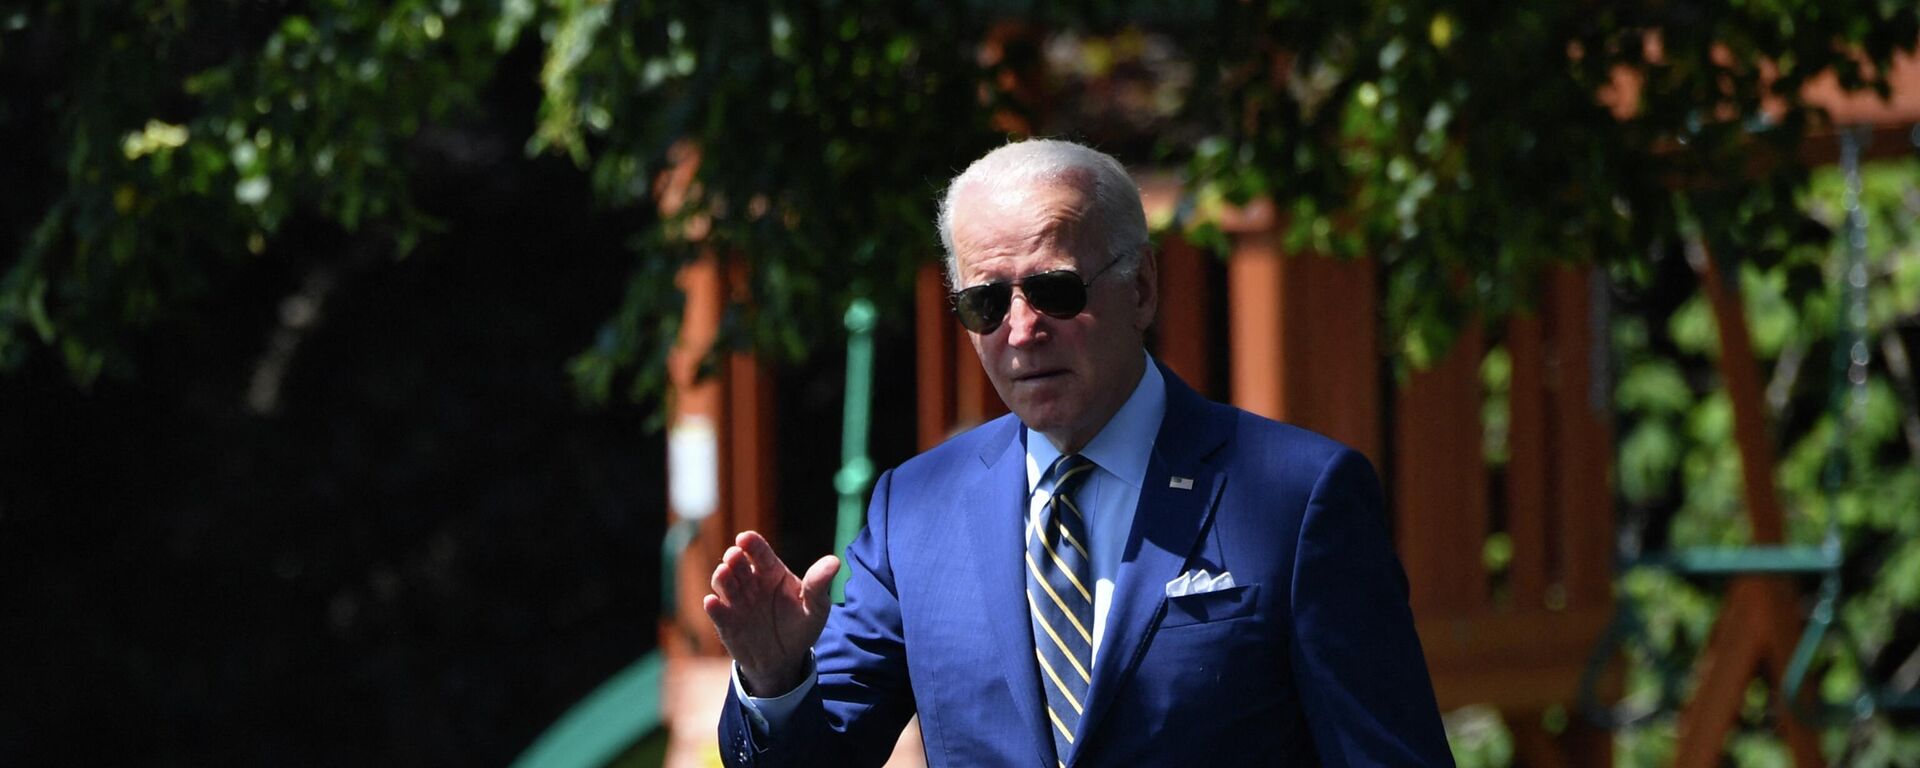 (FILES) In this file photo taken on July 20, 2022 US President Joe Biden waves while walking to Marine One on the South Lawn of the White House in Washington, DC. - Sputnik International, 1920, 22.07.2022